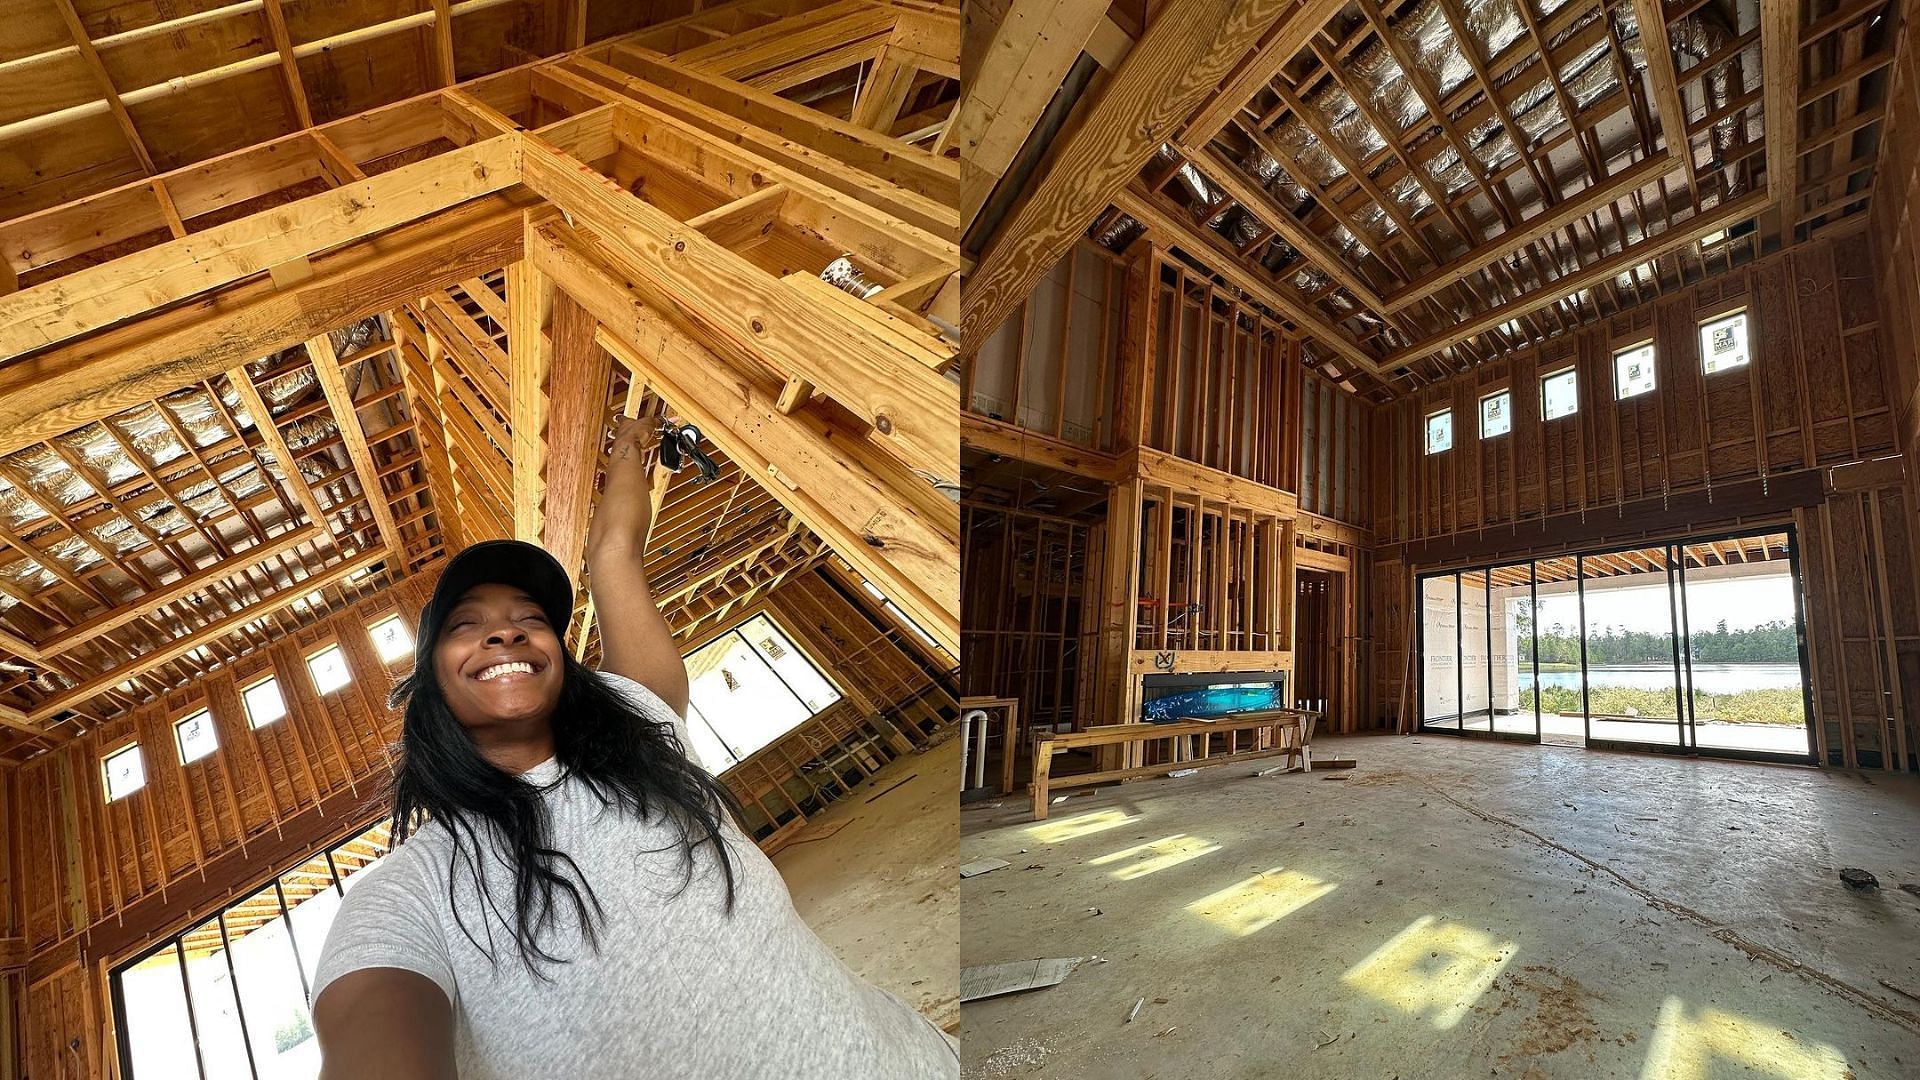 Simone Biles shares a glimpse of her future home with husband Jonathan Owens. (Image credit: Simone Biles on Instagram)